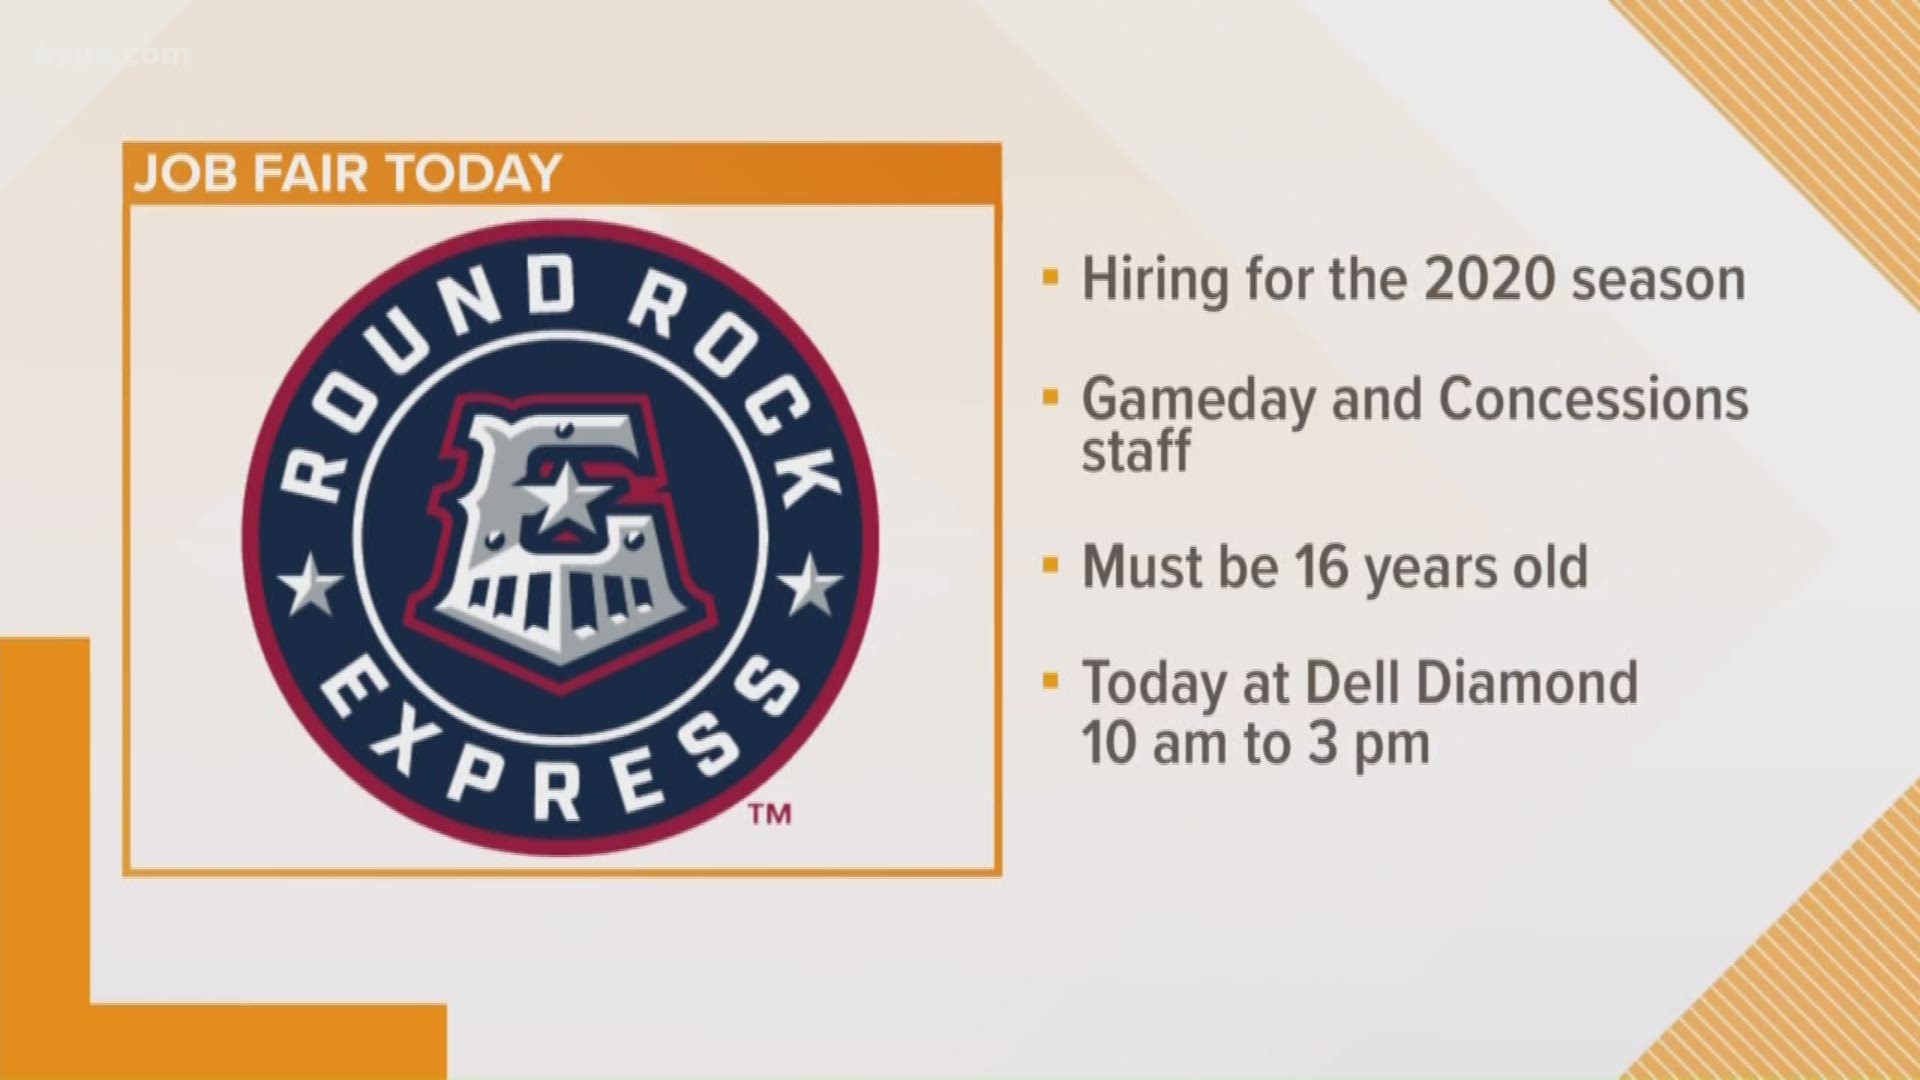 Looking for a job? The Round Rock Express is looking to staff up for the 2020 baseball season.